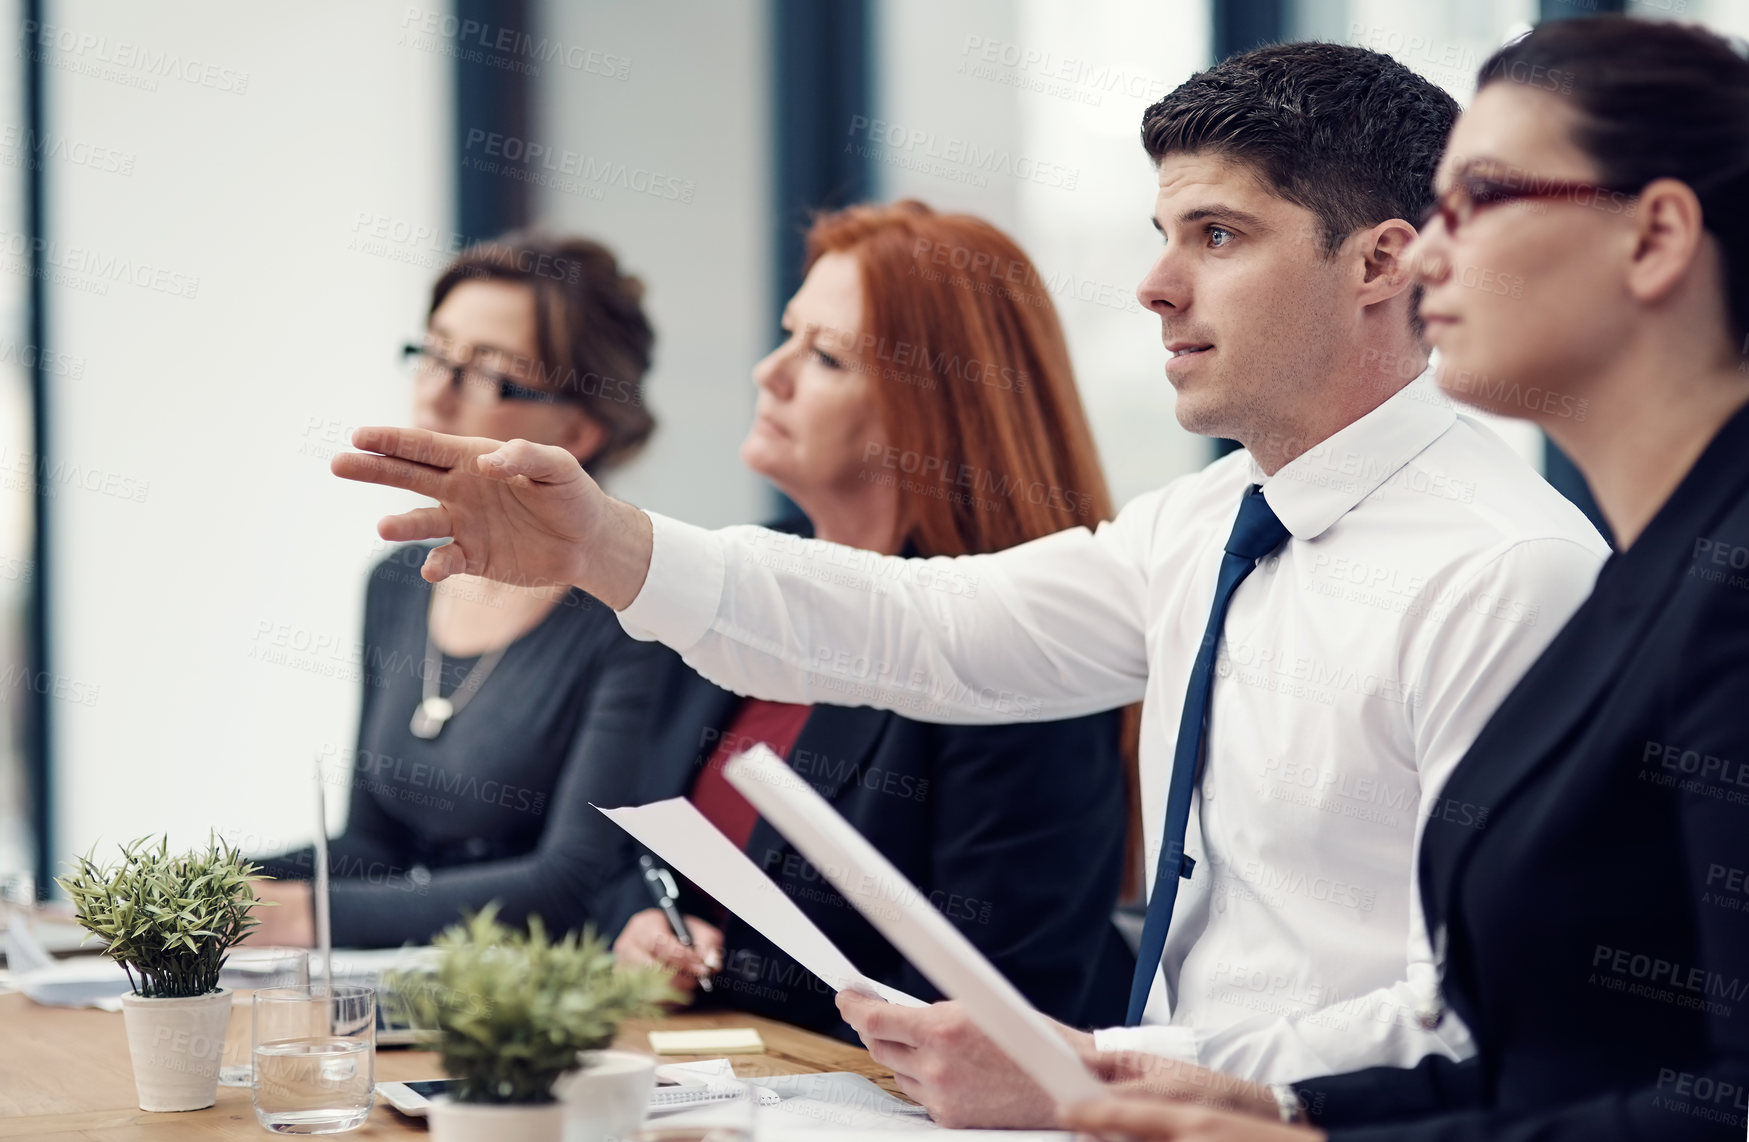 Buy stock photo Cropped shot of a panel of businesspeople giving feedback during a presentation in an office